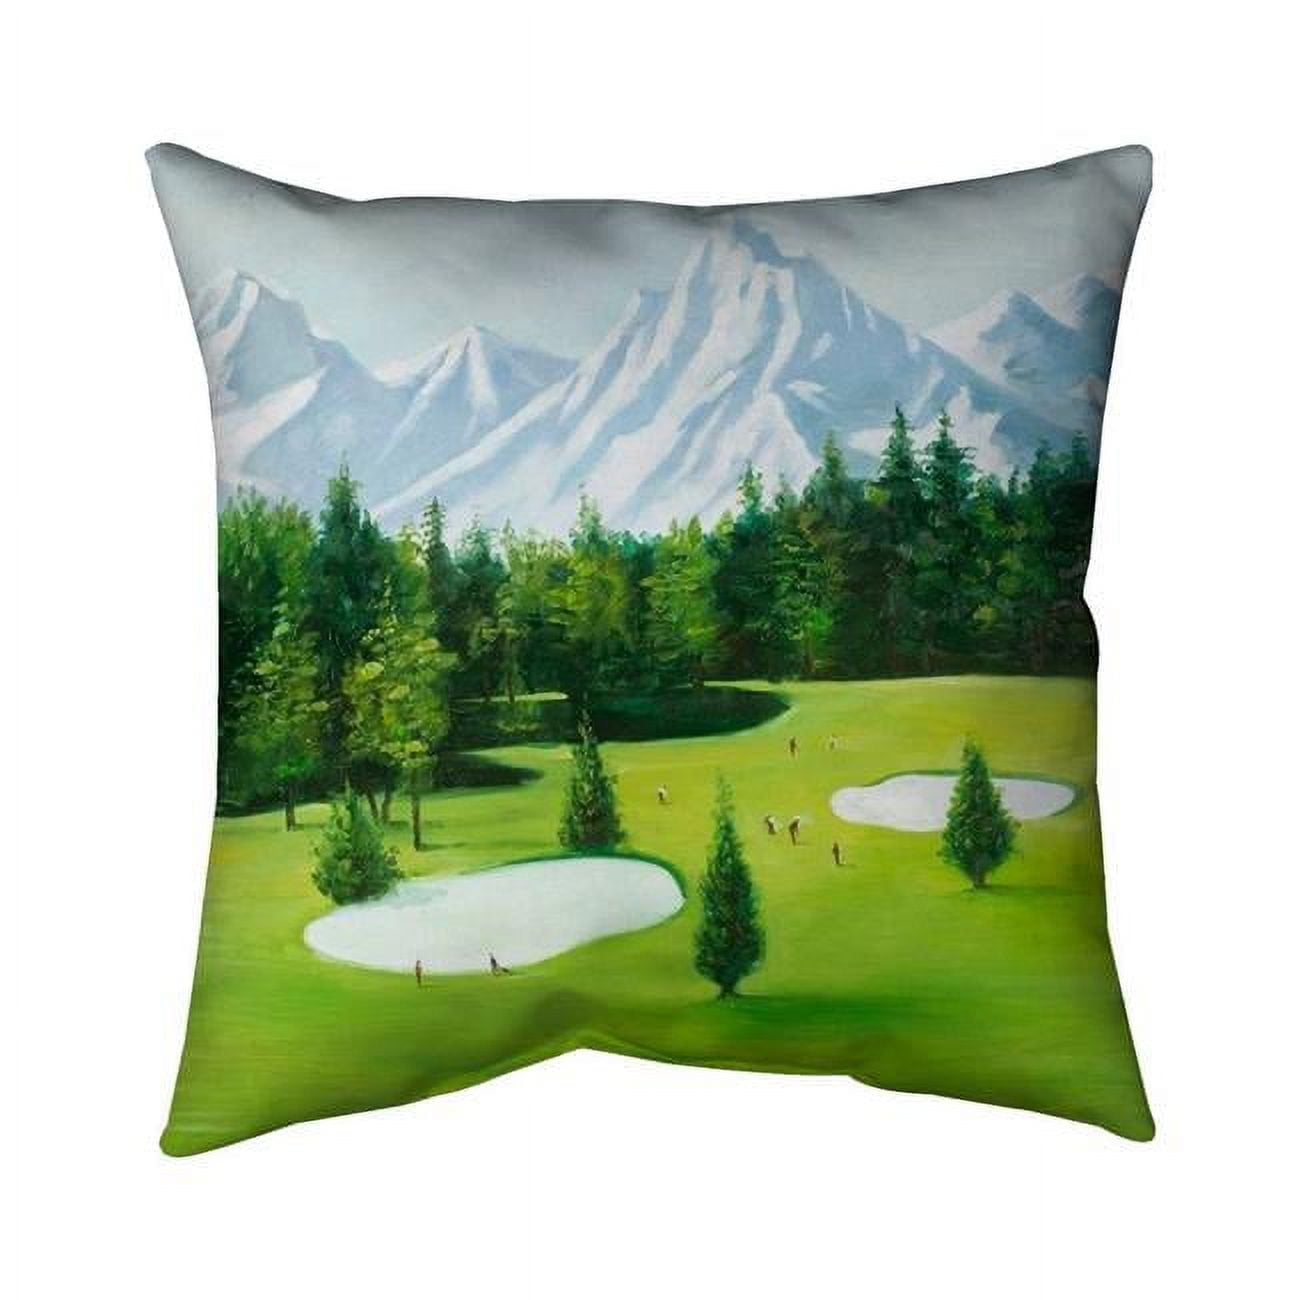 Begin Home Decor 5542-1818-LA82 18 x 18 in. Golf Course with Mountains View-Double Sided Print Outdoor Pillow Cover